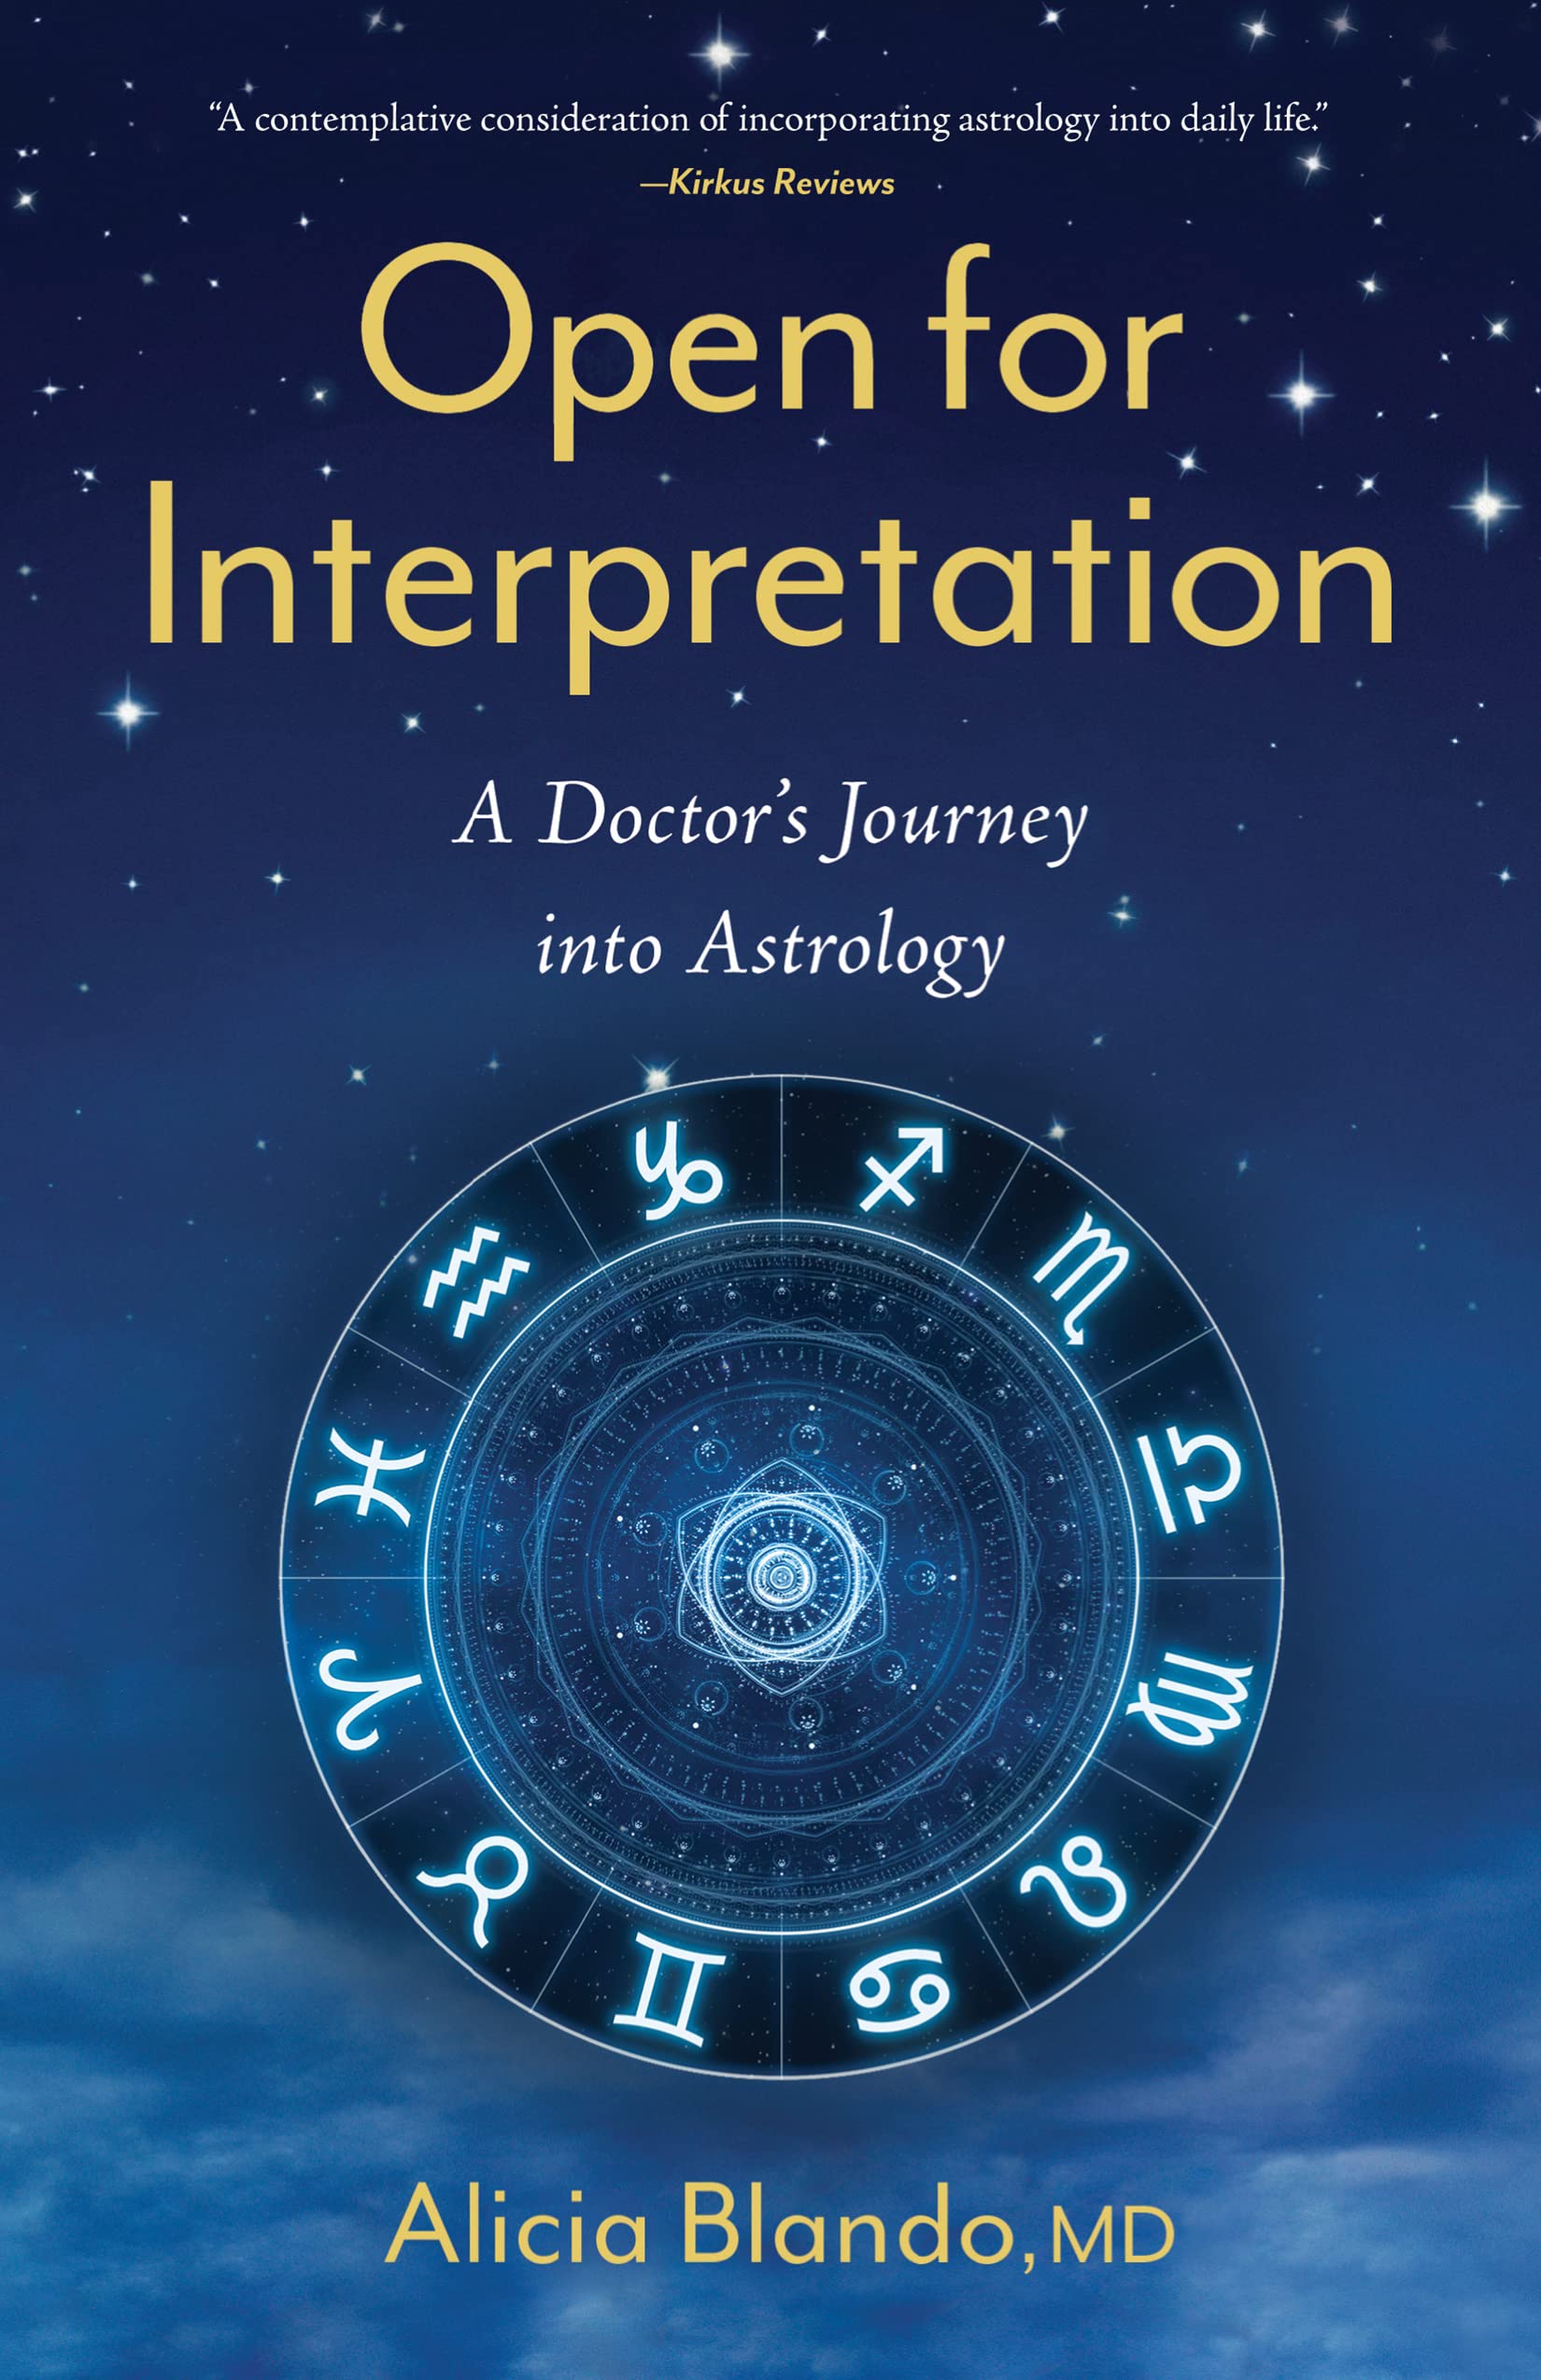 Open for Interpretation: A Doctor’s Journey into Astrology